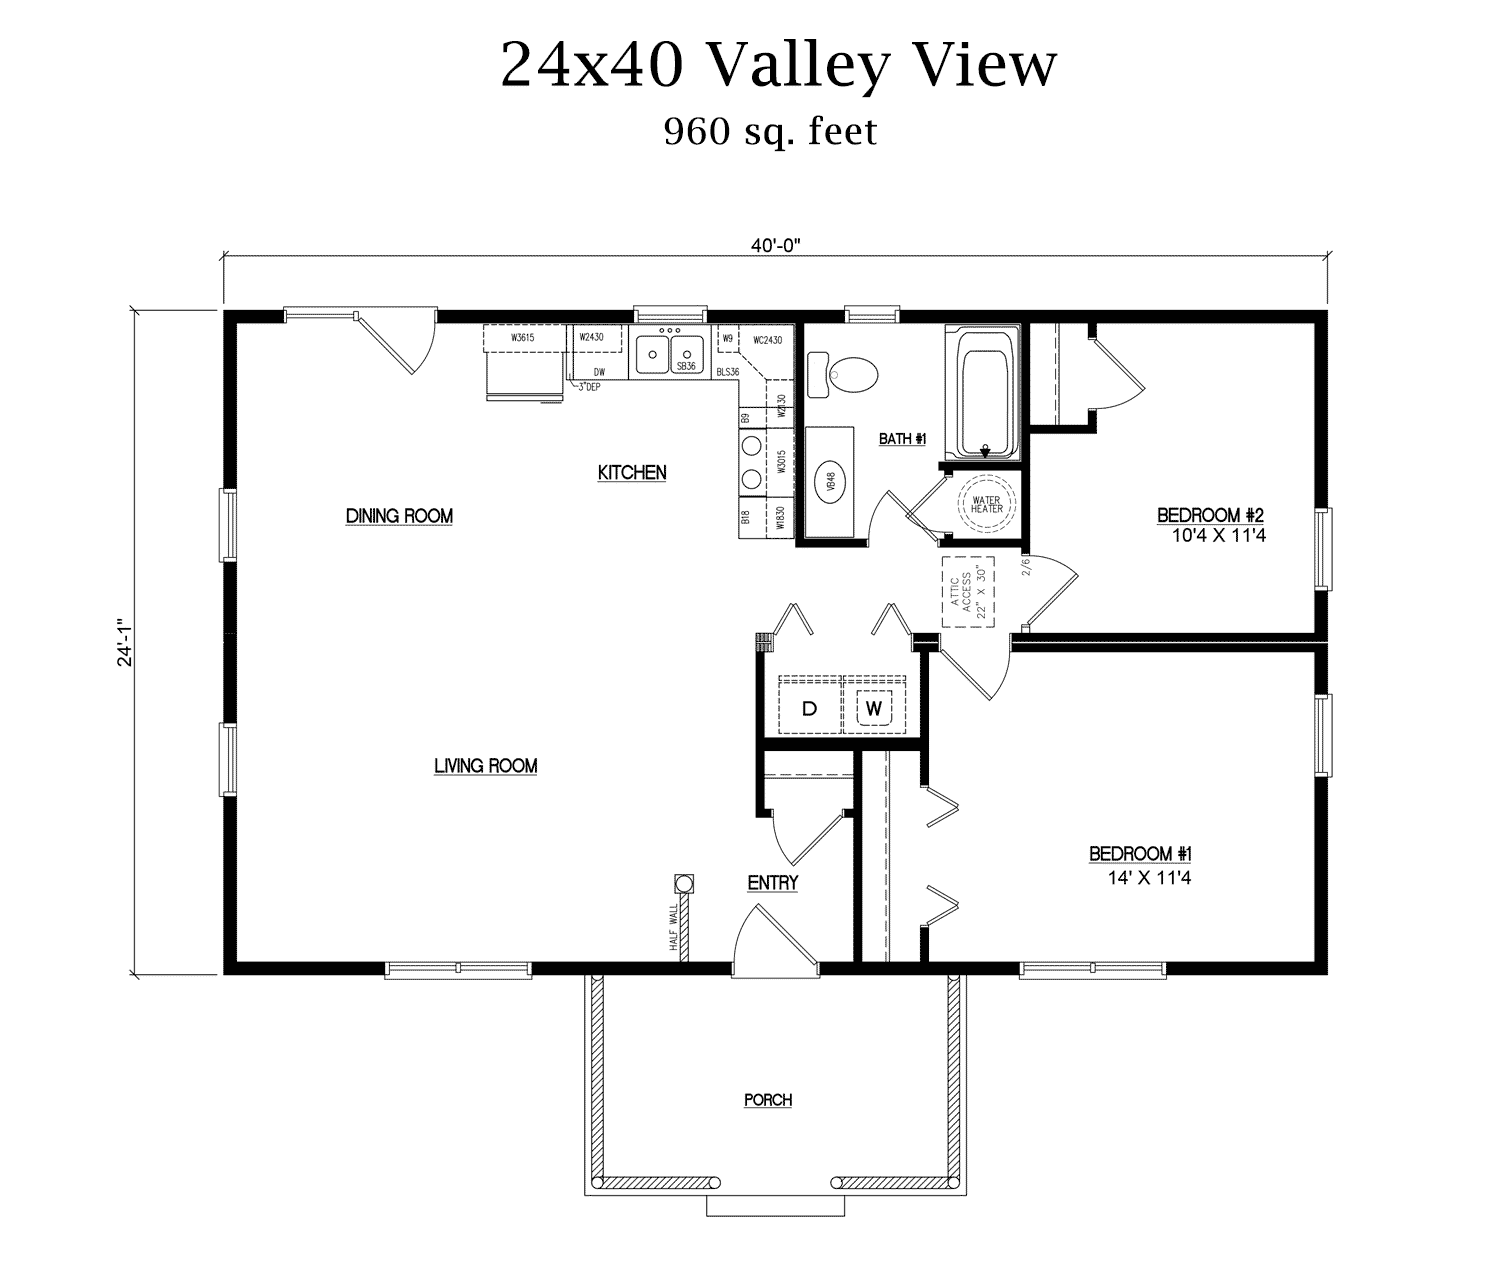 Valley View 24x40 Log Home Floor Plans